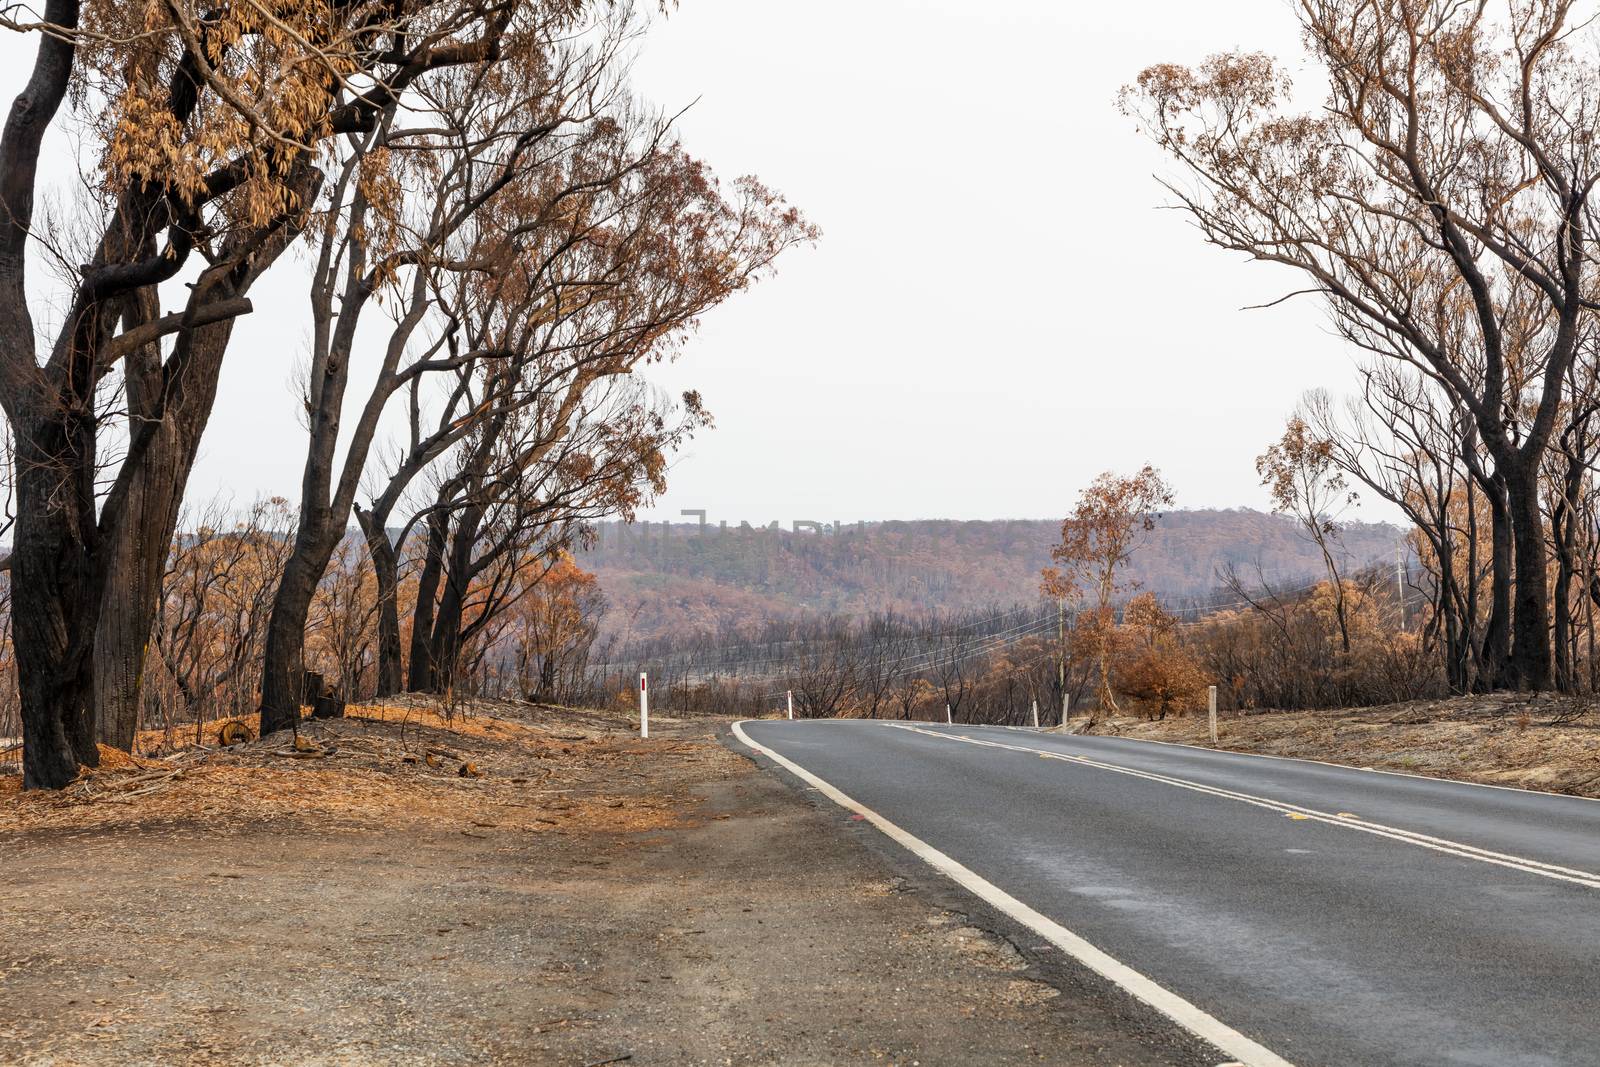 A road surrounded by burnt gum trees due to bushfire in The Blue Mountains in Australia by WittkePhotos